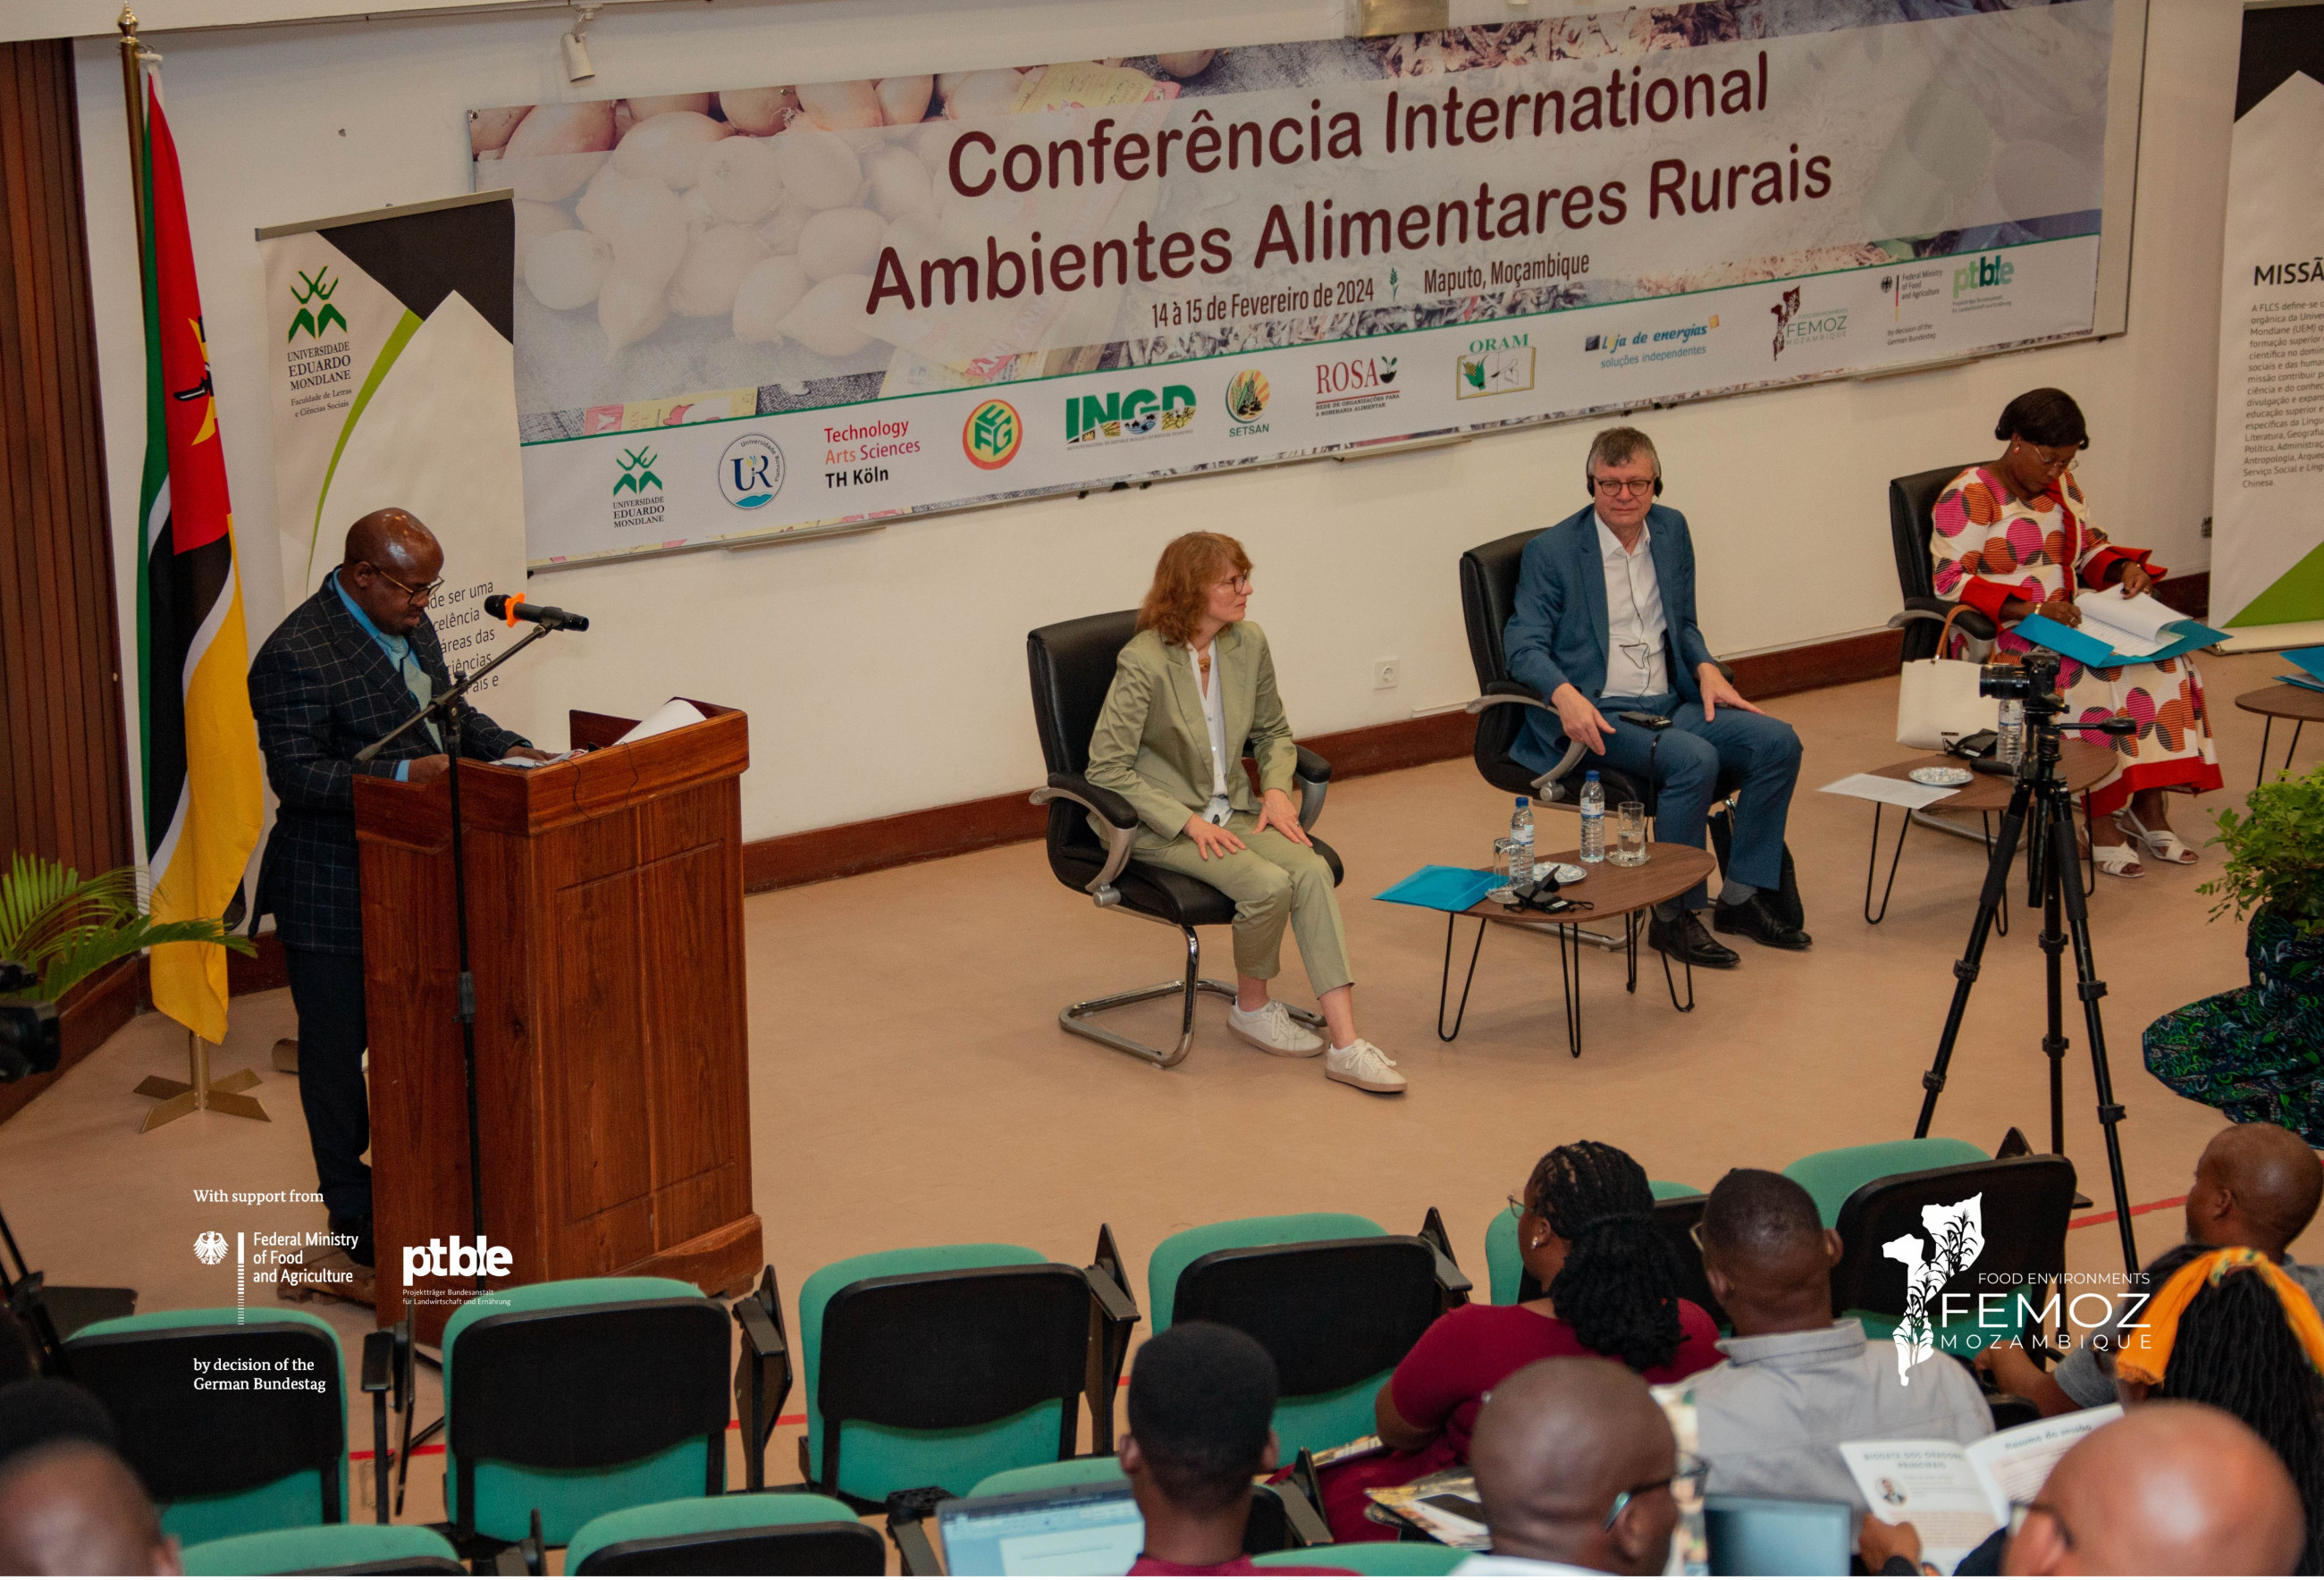 FEMOZ International Conference on Rural Food Environments